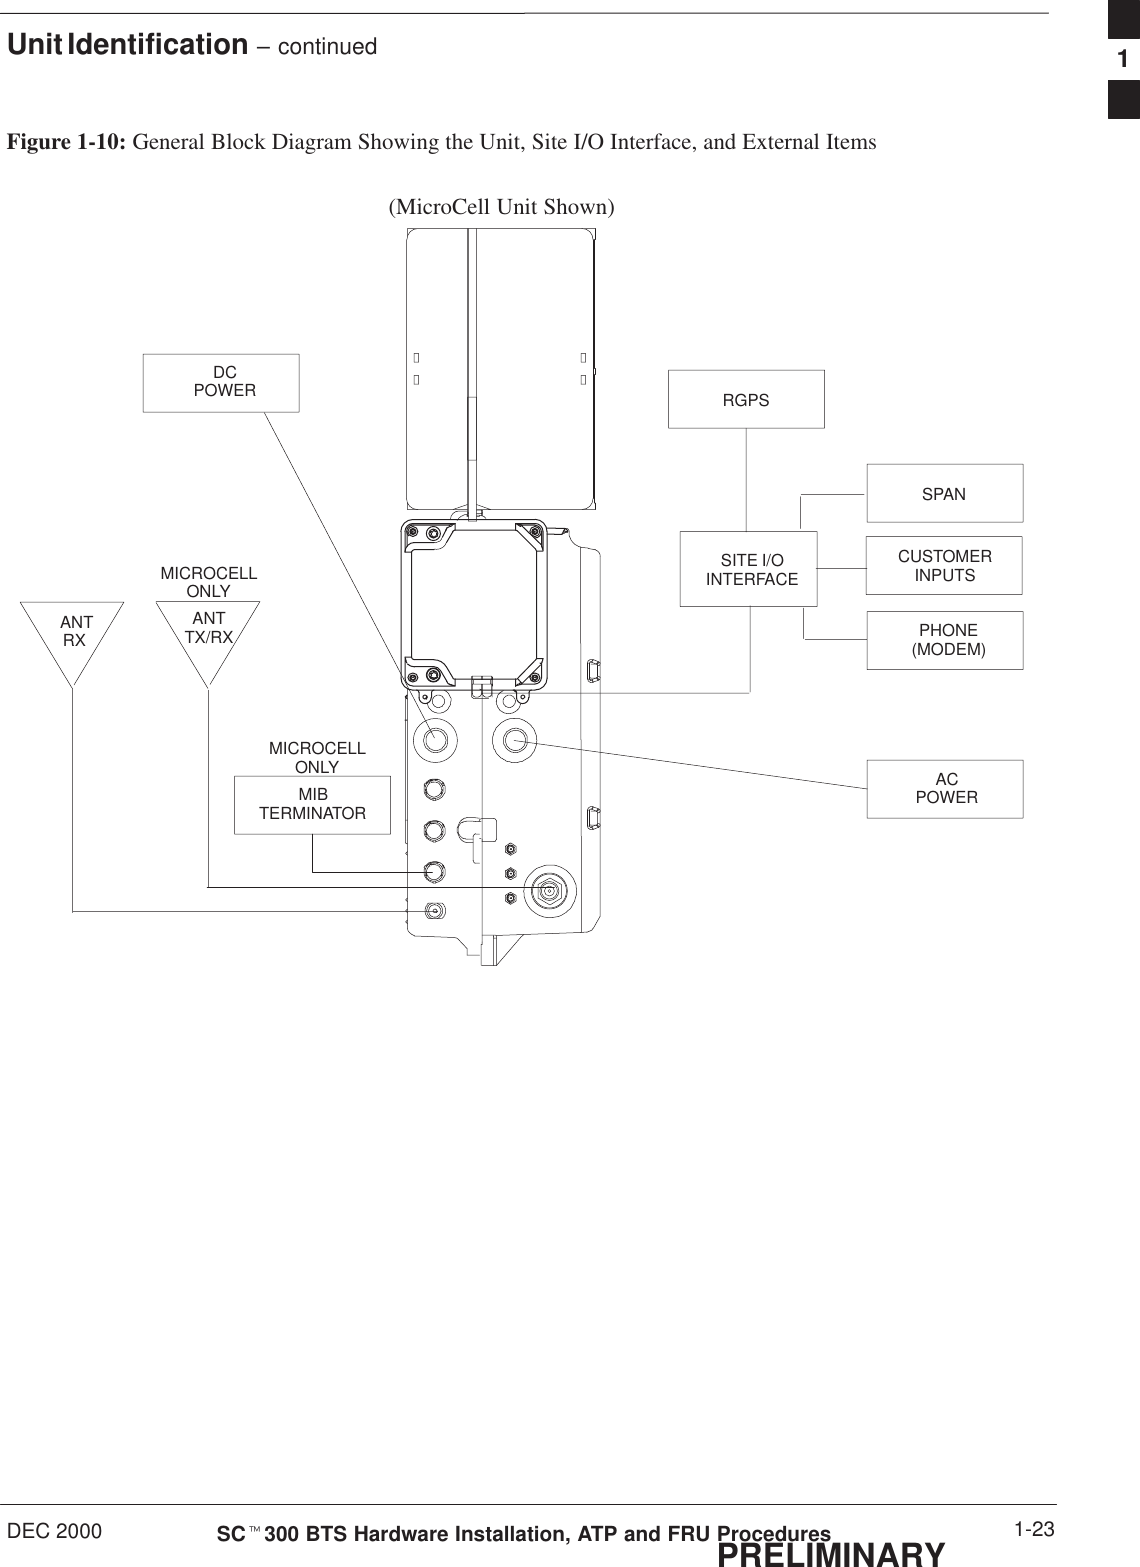 Unit Identification – continuedDEC 2000 1-23SCt300 BTS Hardware Installation, ATP and FRU ProceduresPRELIMINARYFigure 1-10: General Block Diagram Showing the Unit, Site I/O Interface, and External Items              ANT           RXANTTX/RXCUSTOMERINPUTSSPANRGPSDCPOWERPHONE(MODEM)ACPOWERSITE I/OINTERFACEMICROCELLONLY(MicroCell Unit Shown)MIBTERMINATORMICROCELLONLY1